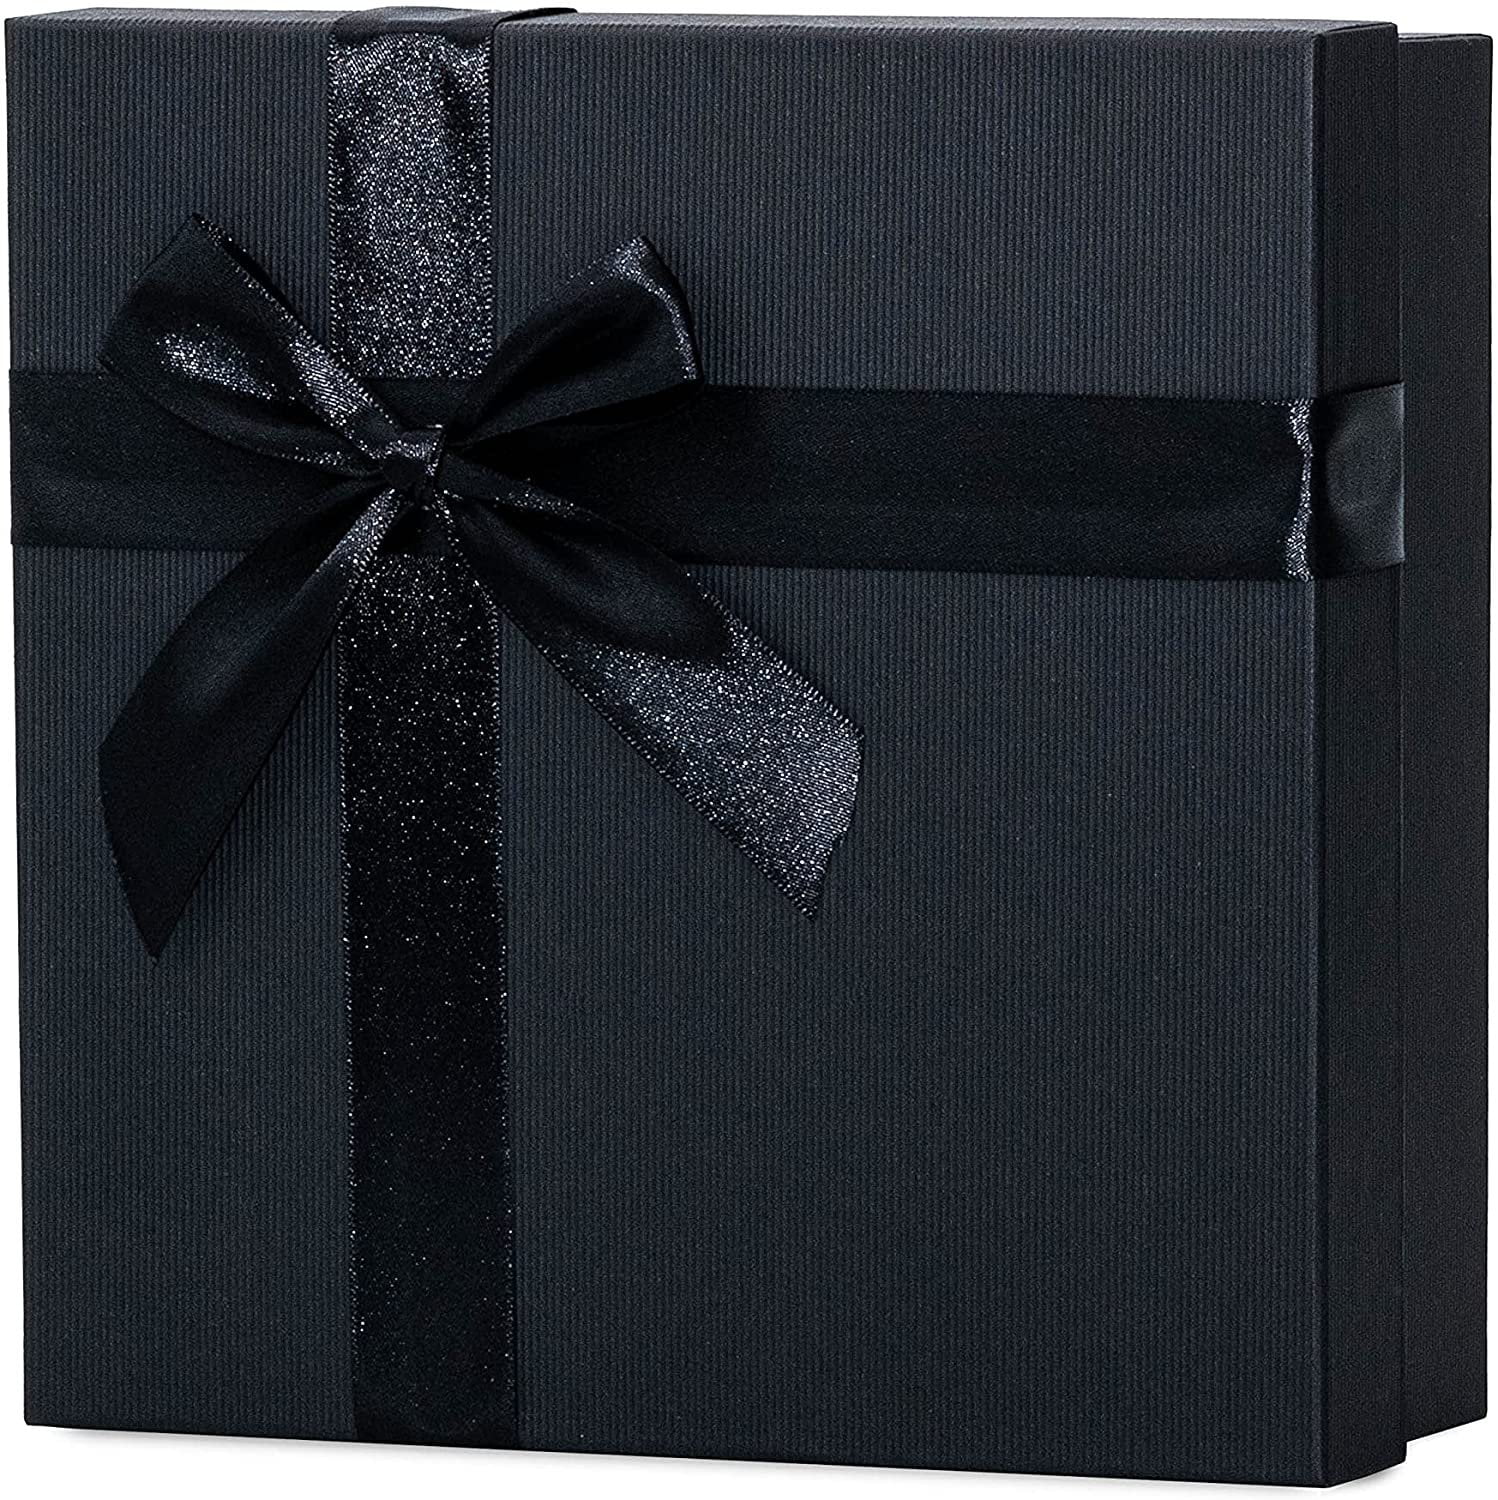 Chanel Black Gift Box with White Ribbon Bow  Black gift boxes, Ribbon  bows, White ribbon